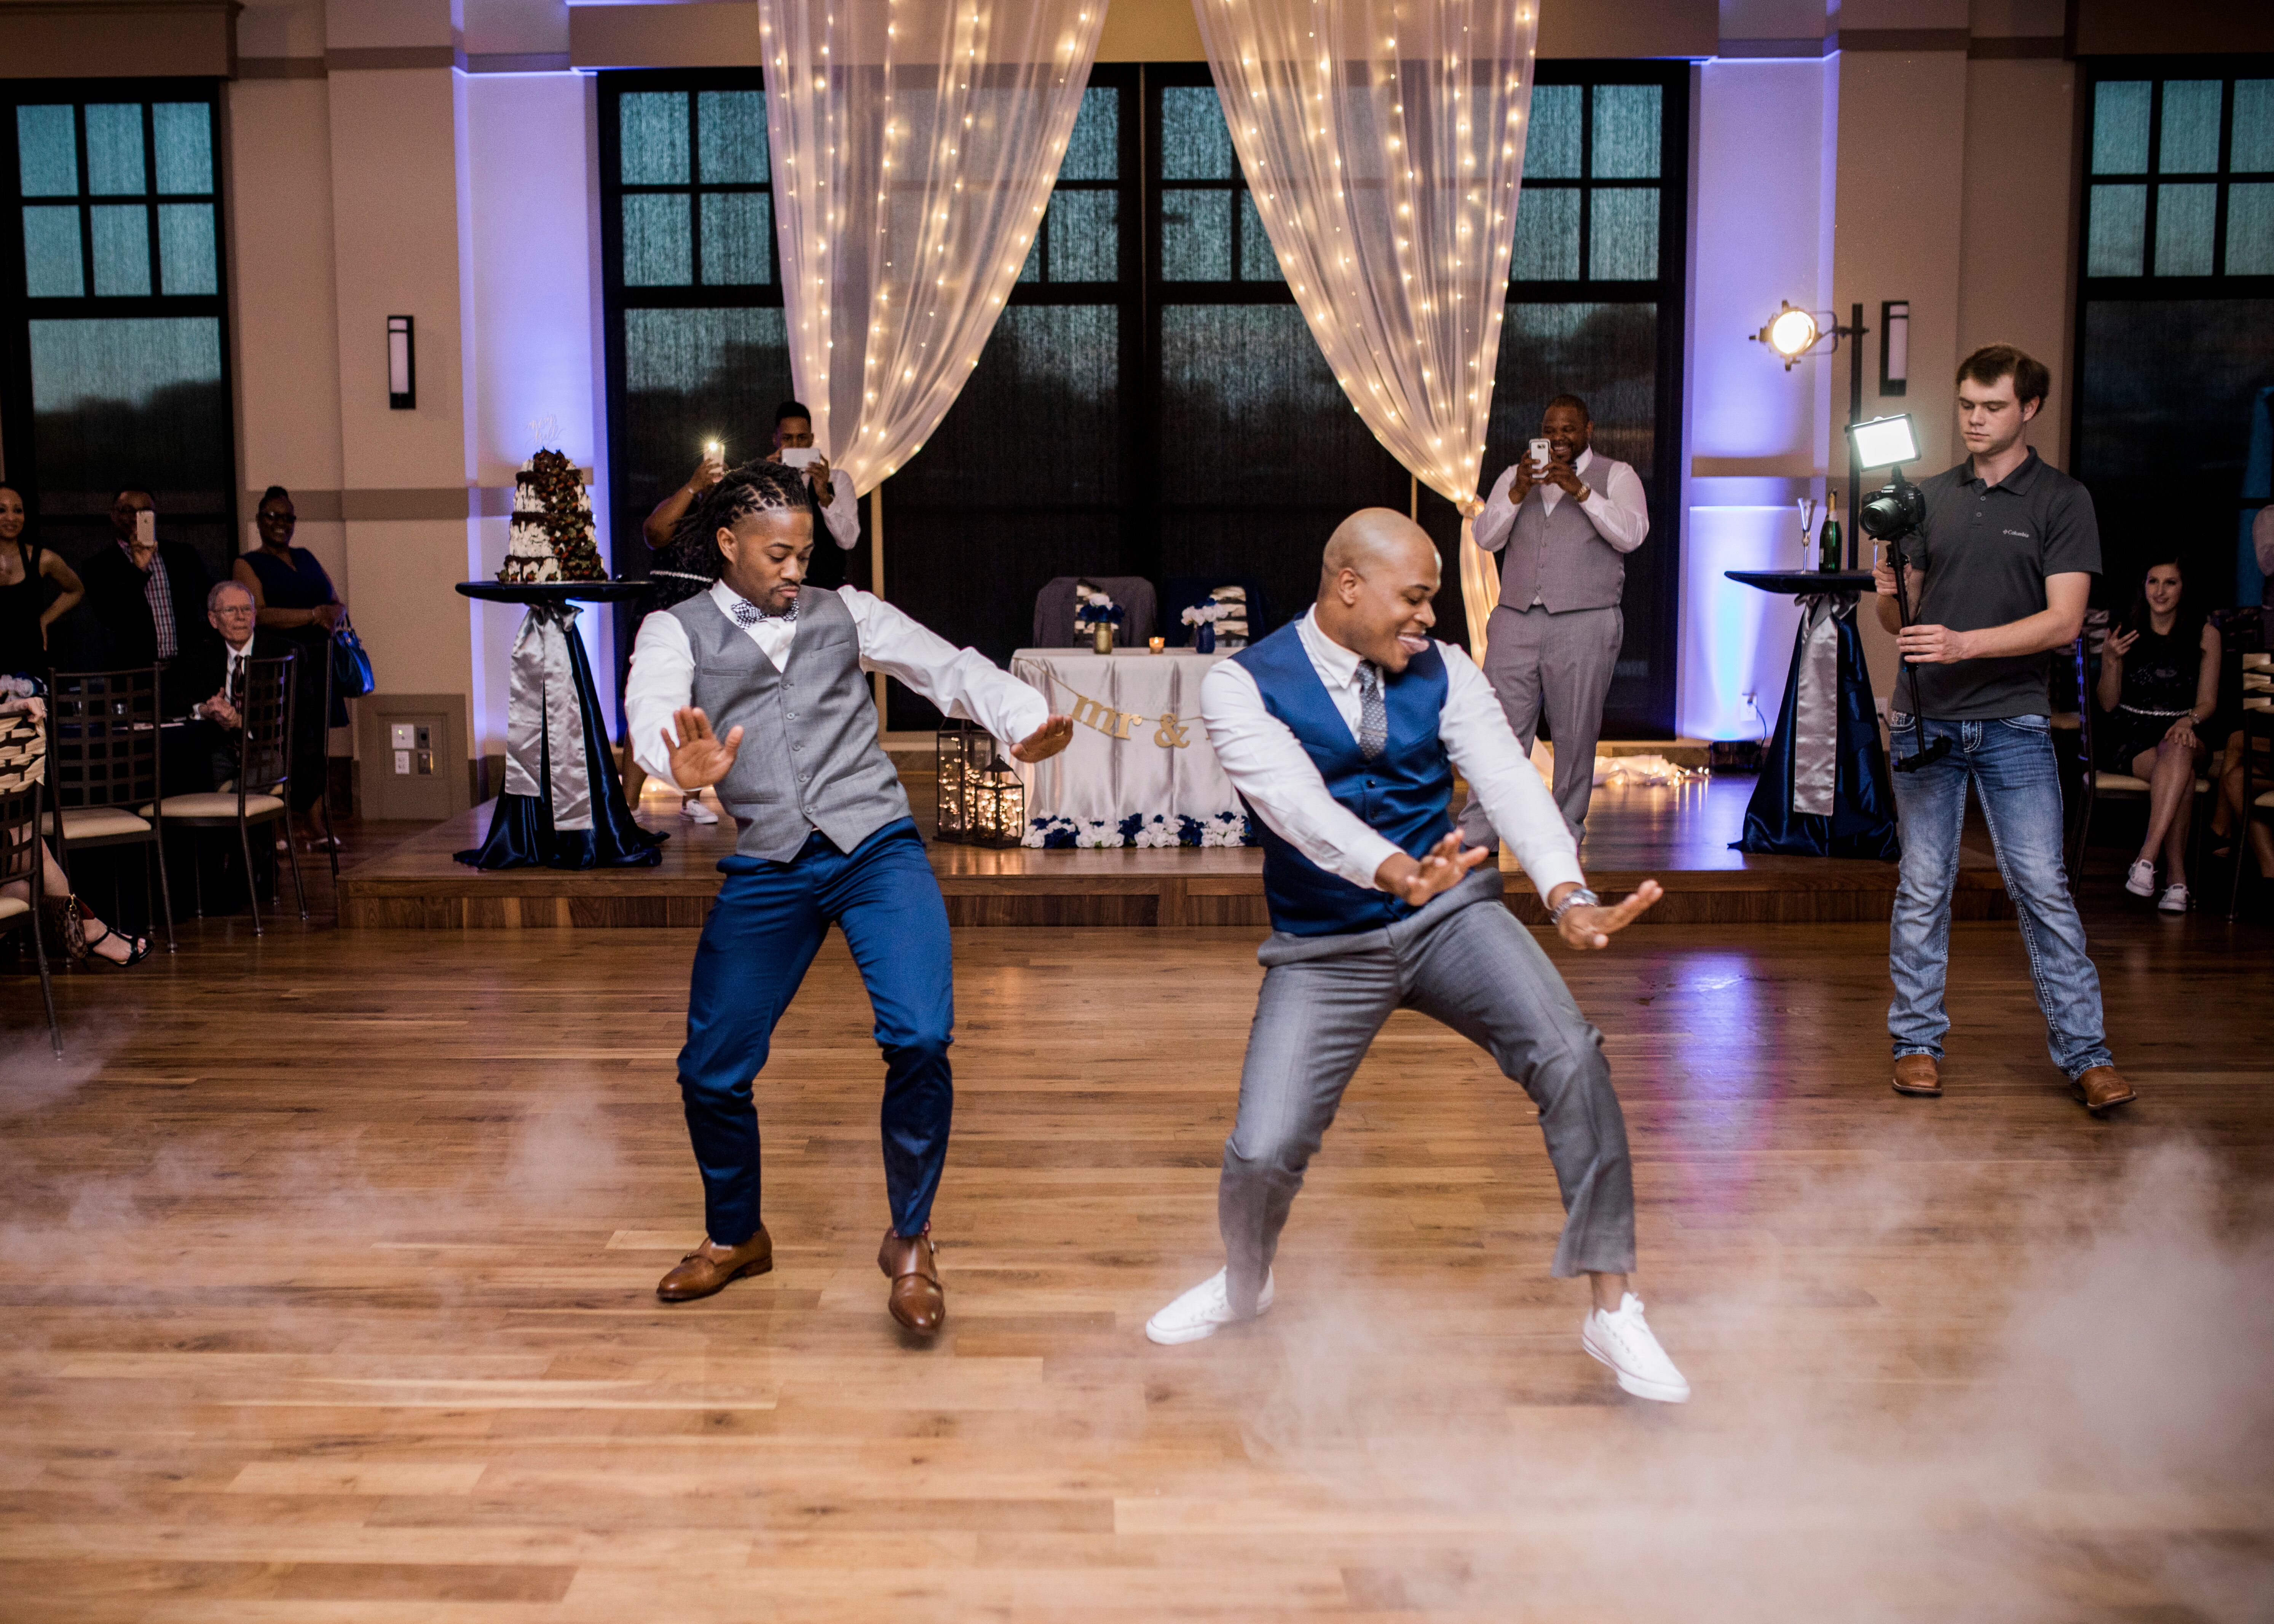 how to choreograph a wedding dance routine